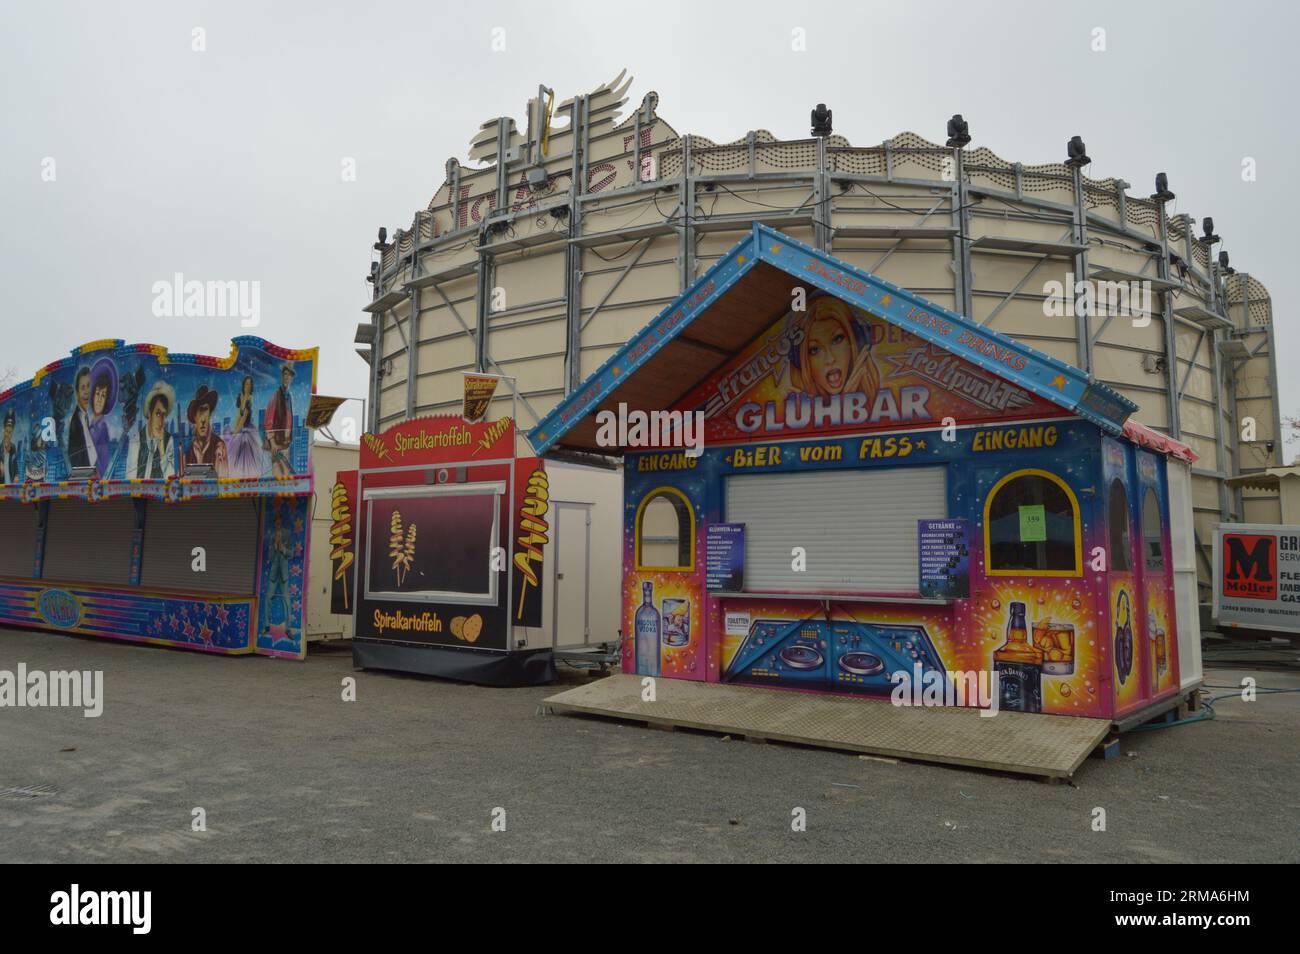 Mulled wine stall and shooting gallery at the fair in Lemgo, Germany Stock Photo